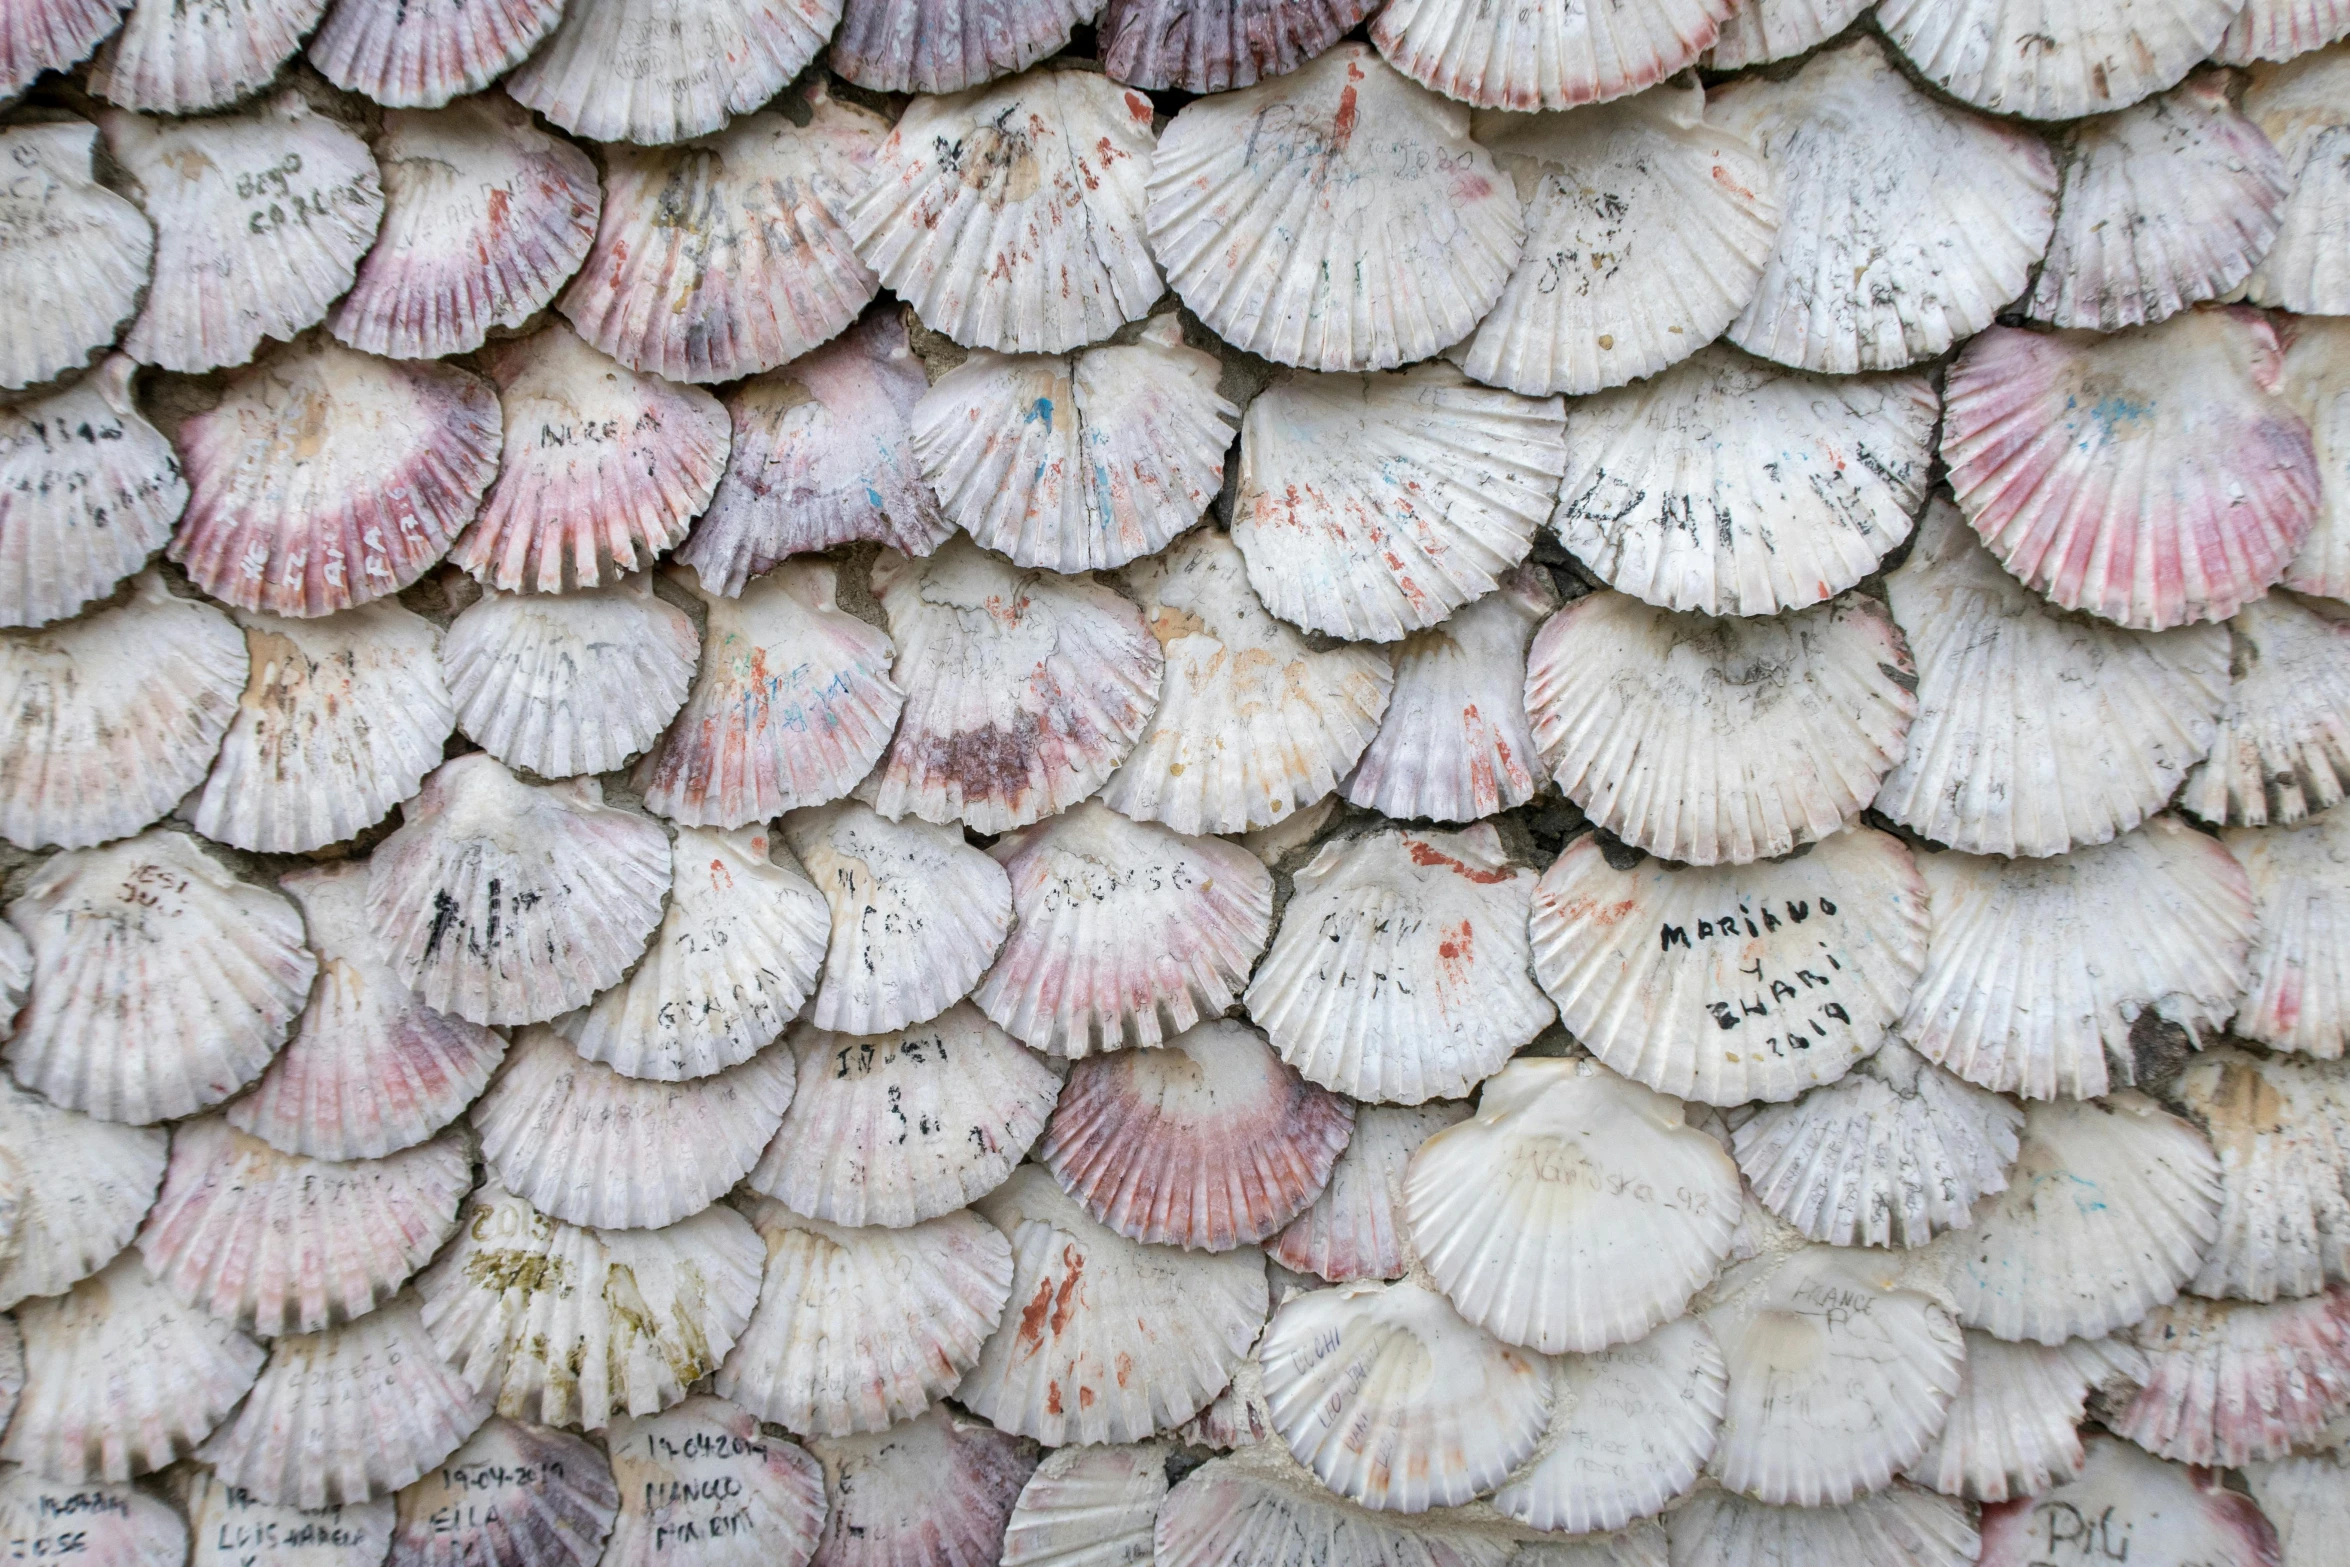 a close up view of shells that are colorful